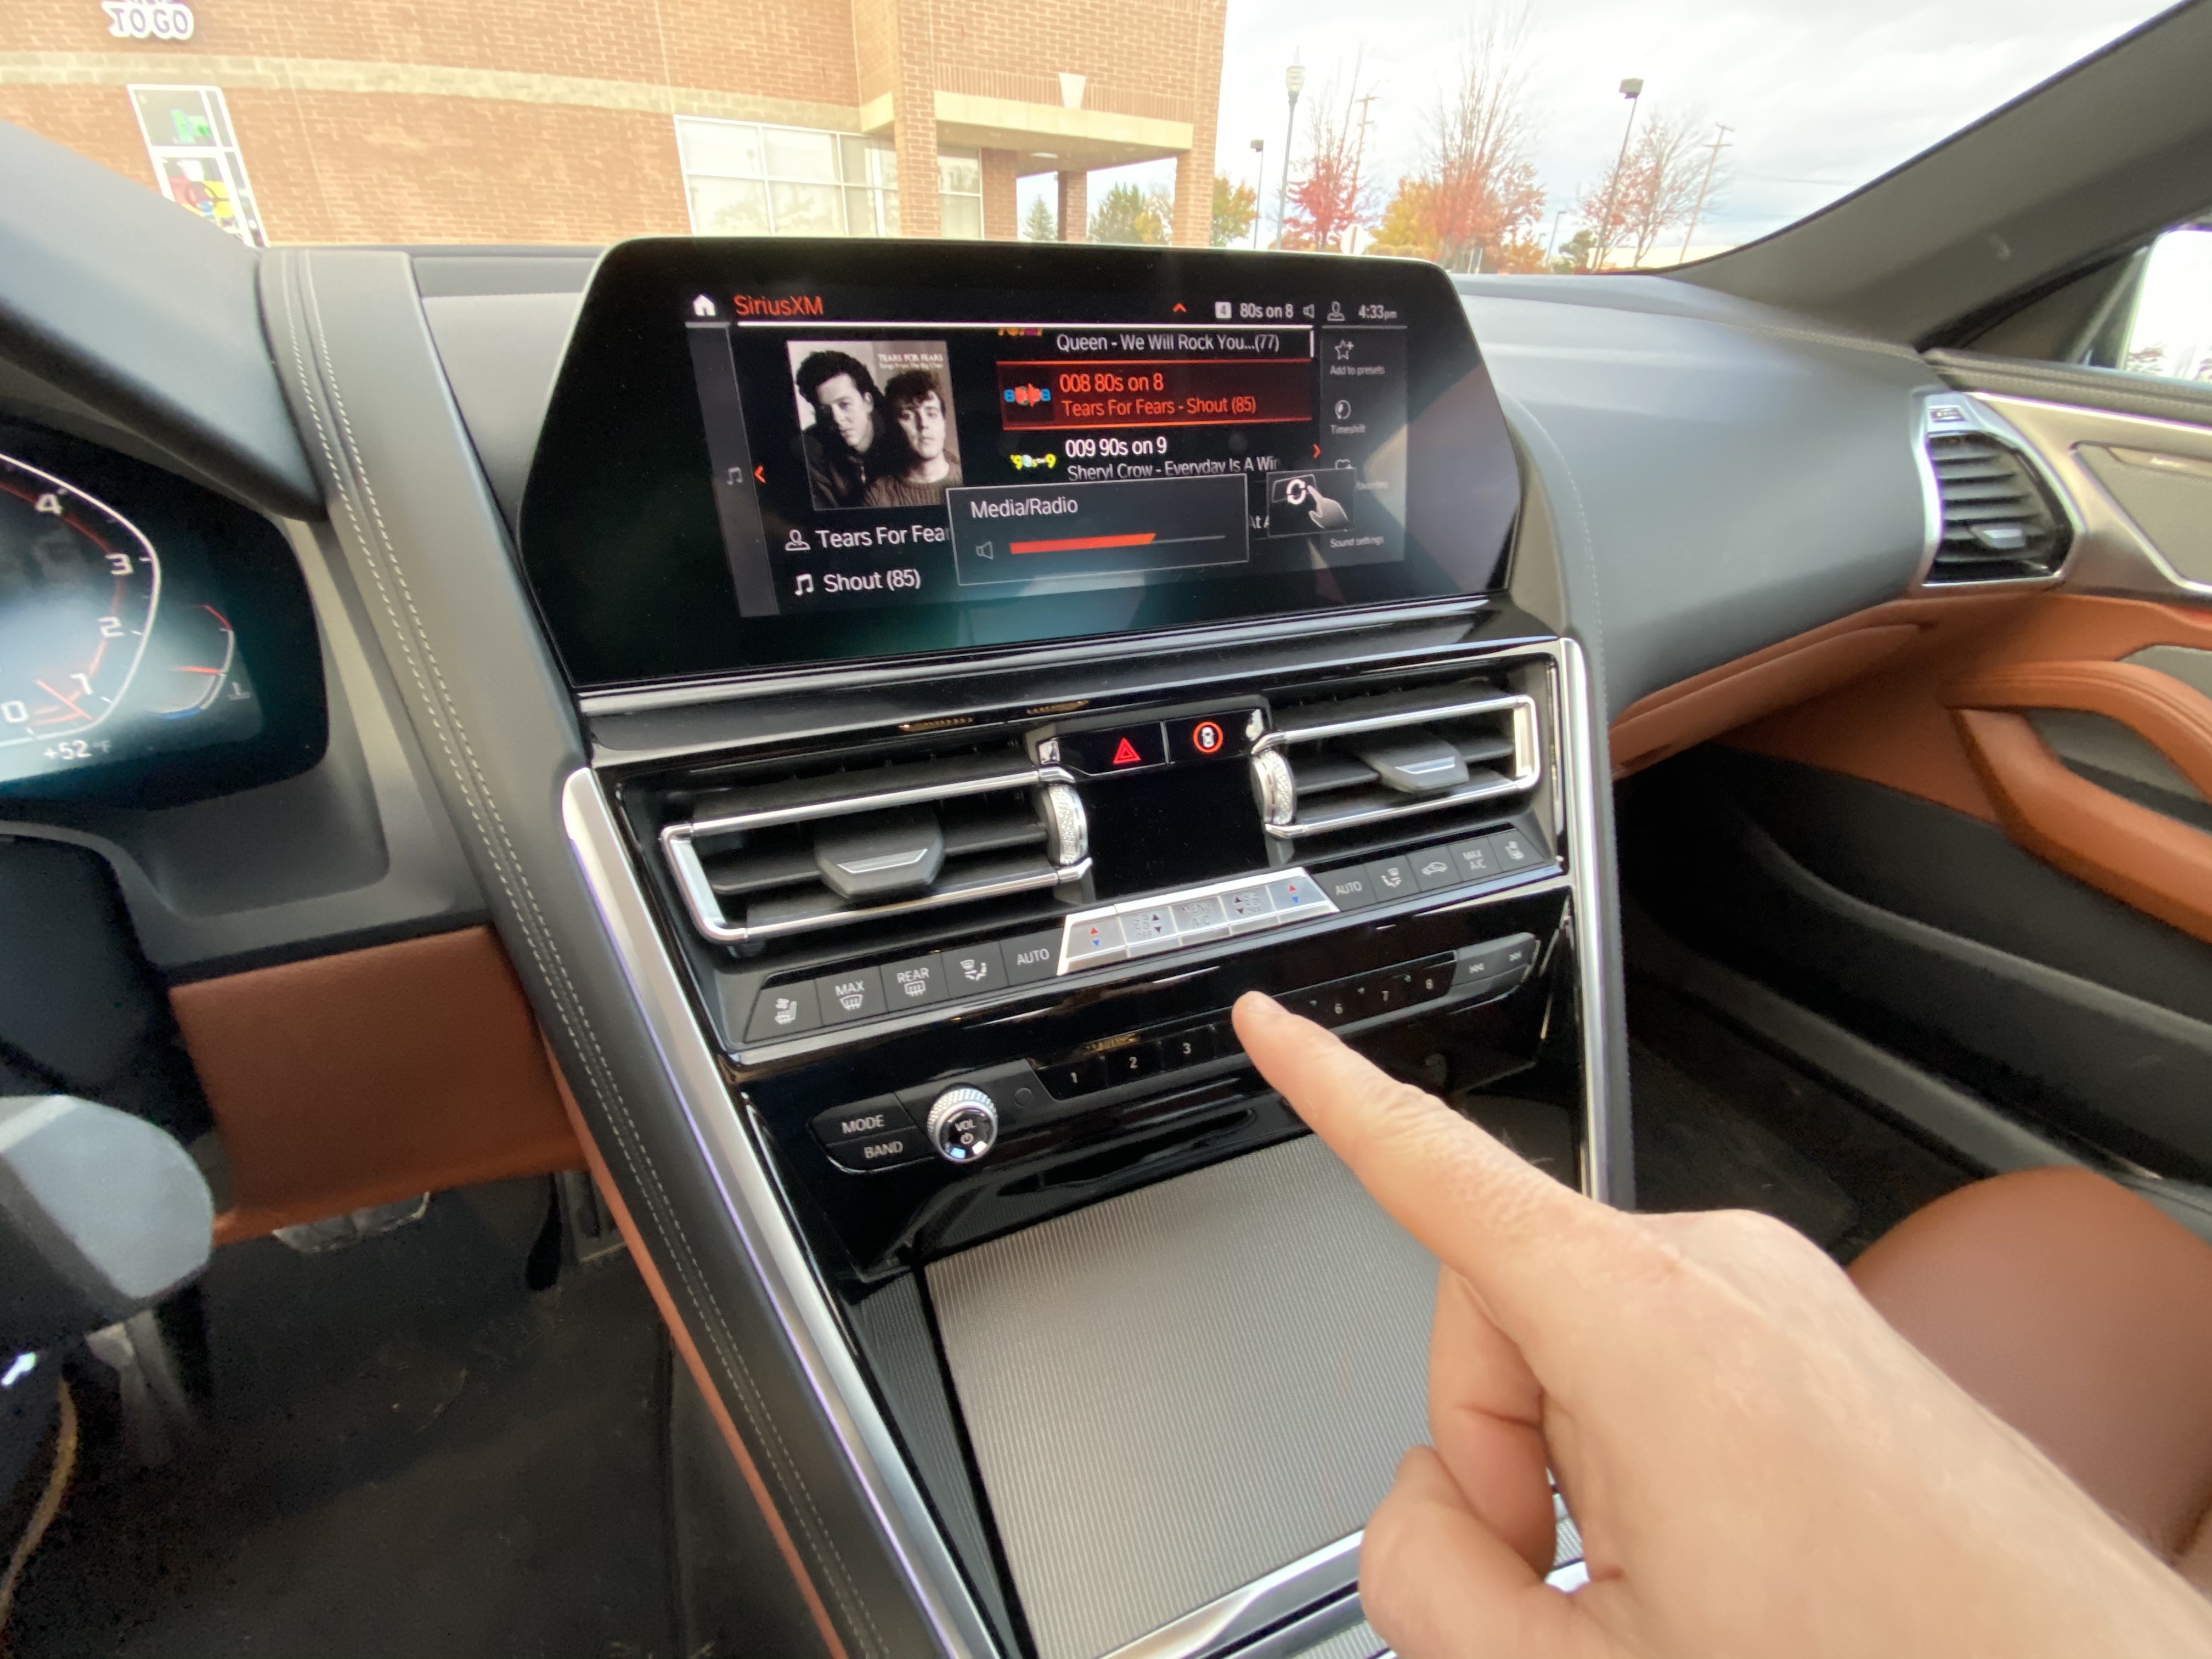 BMW’s magical gesture control finally makes sense as touchscreens take over cars